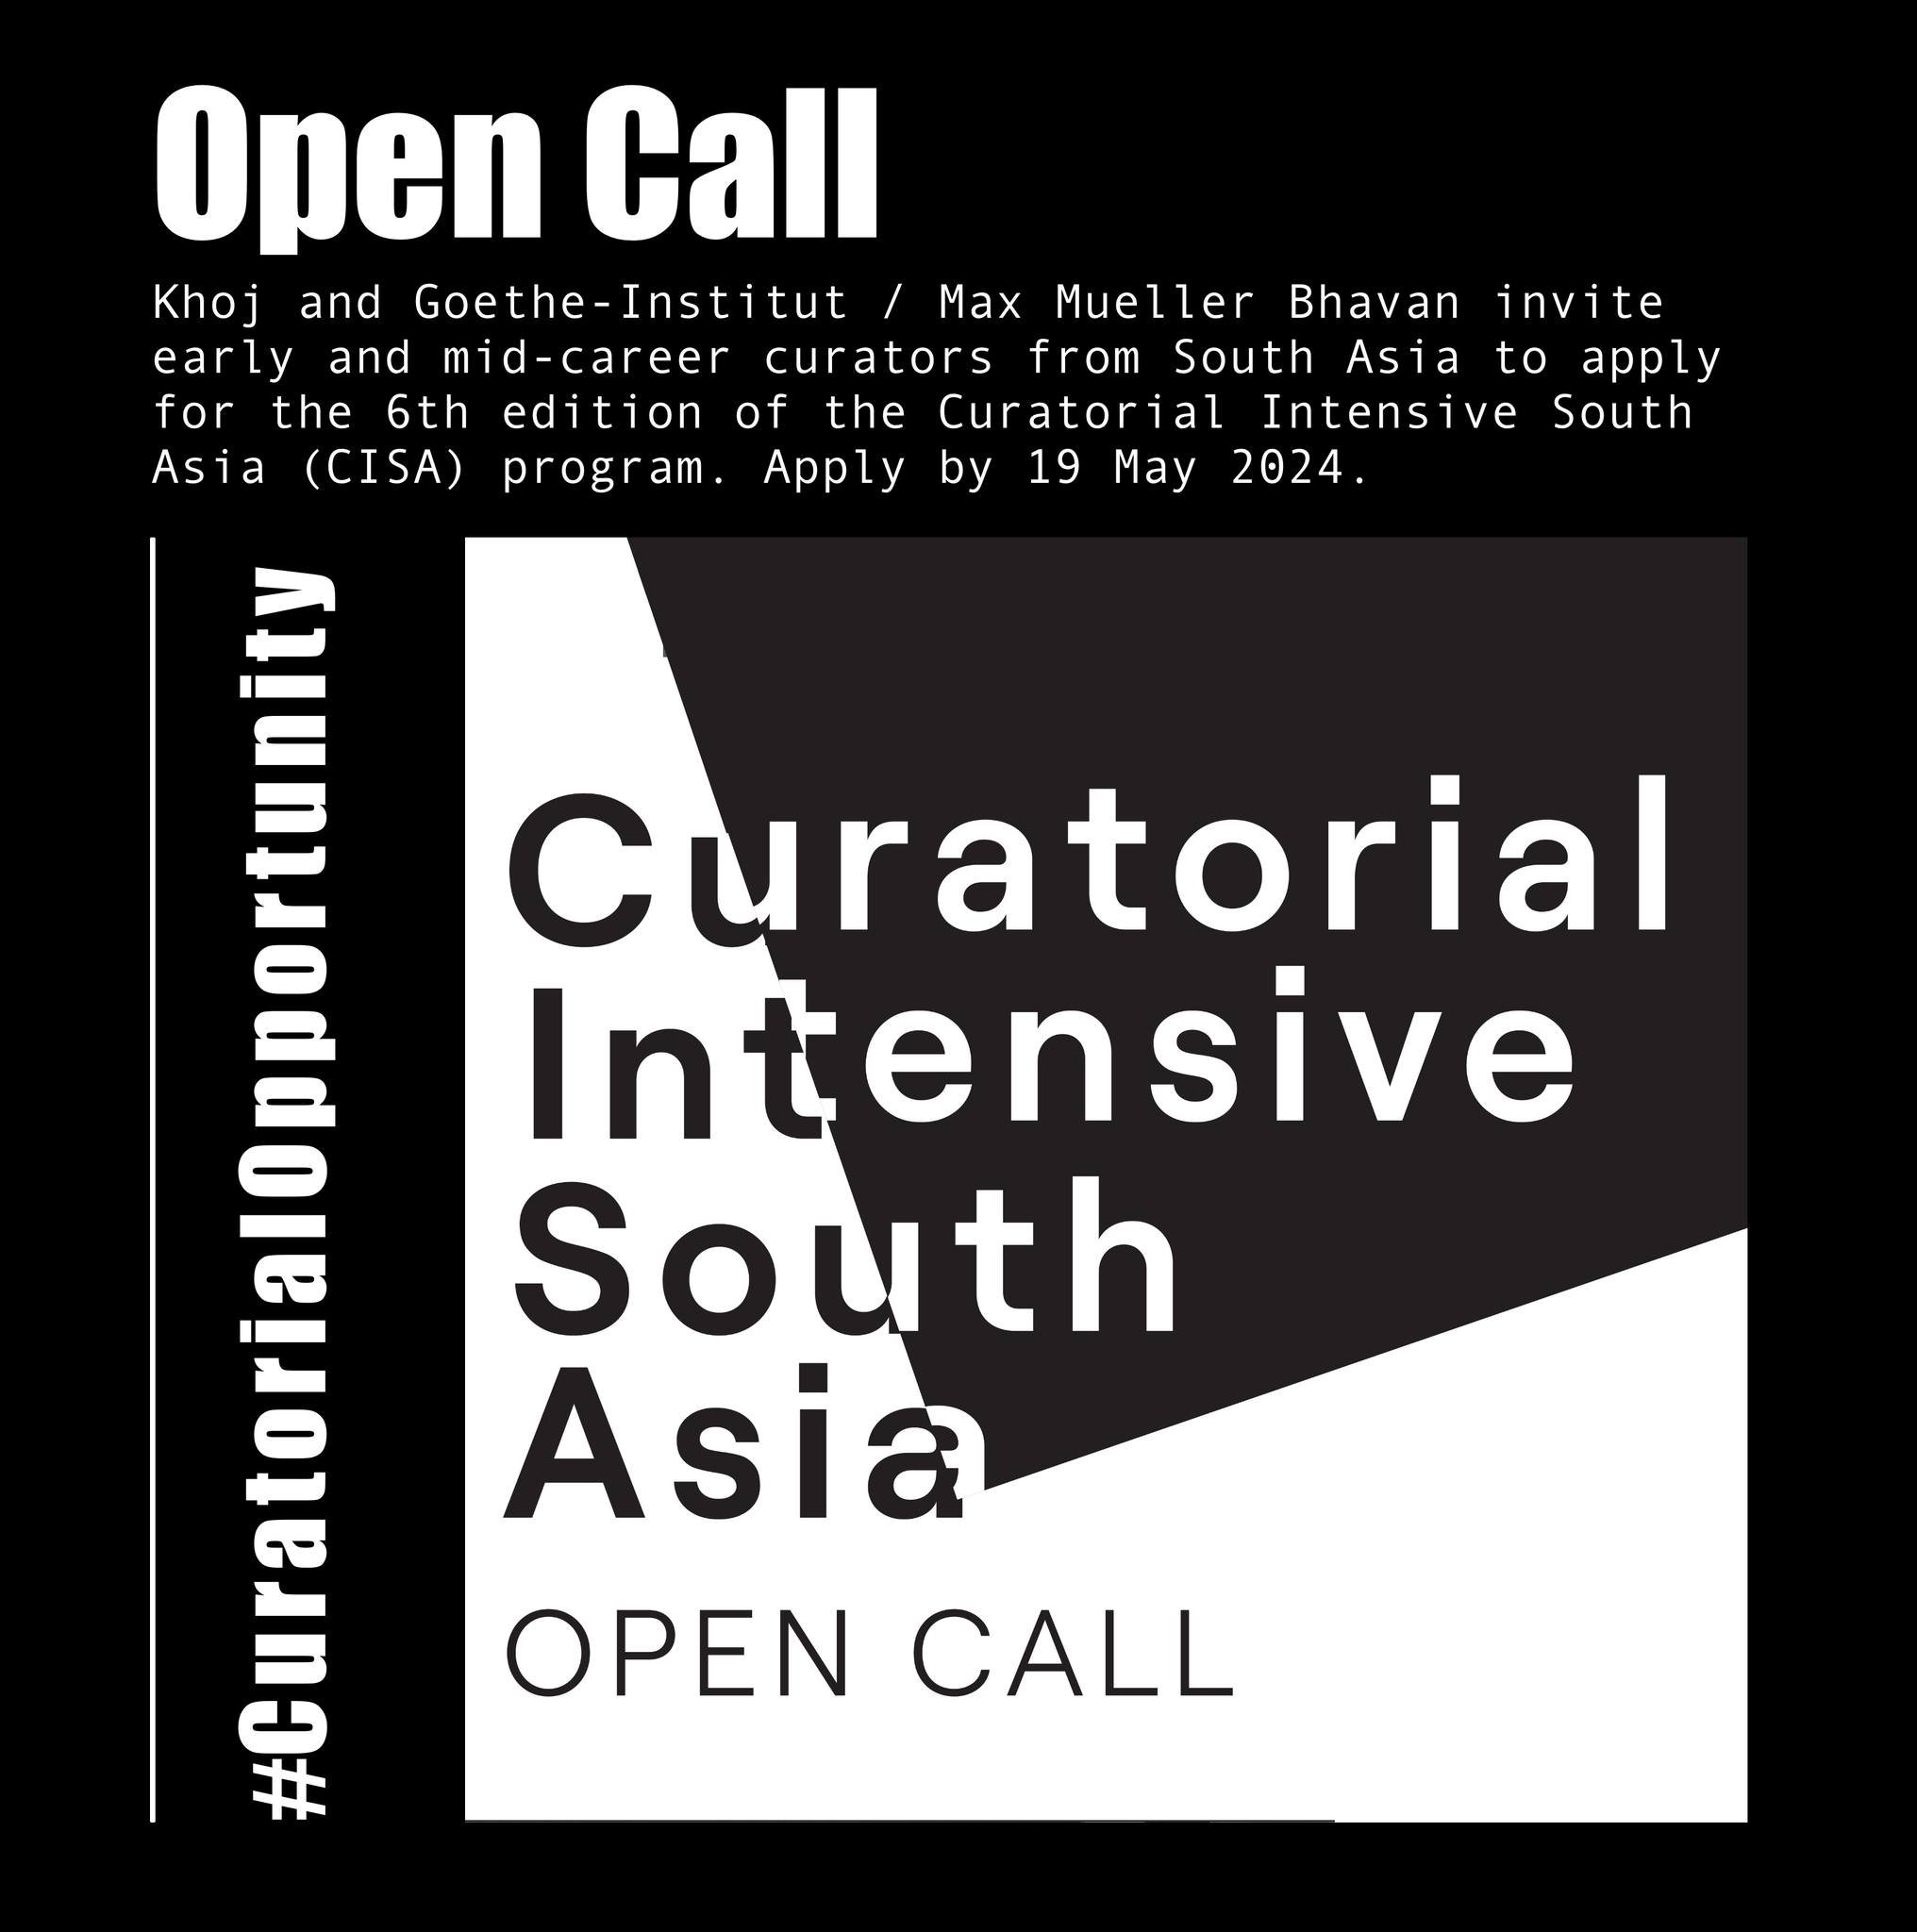 Khoj and Goethe-Institut / Max Mueller Bhavan are pleased to invite applications from early and mid-career curators from South Asia to apply for the 6th edition of the Curatorial Intensive South Asia (CISA) program &ndash; (re)imagined this year as a